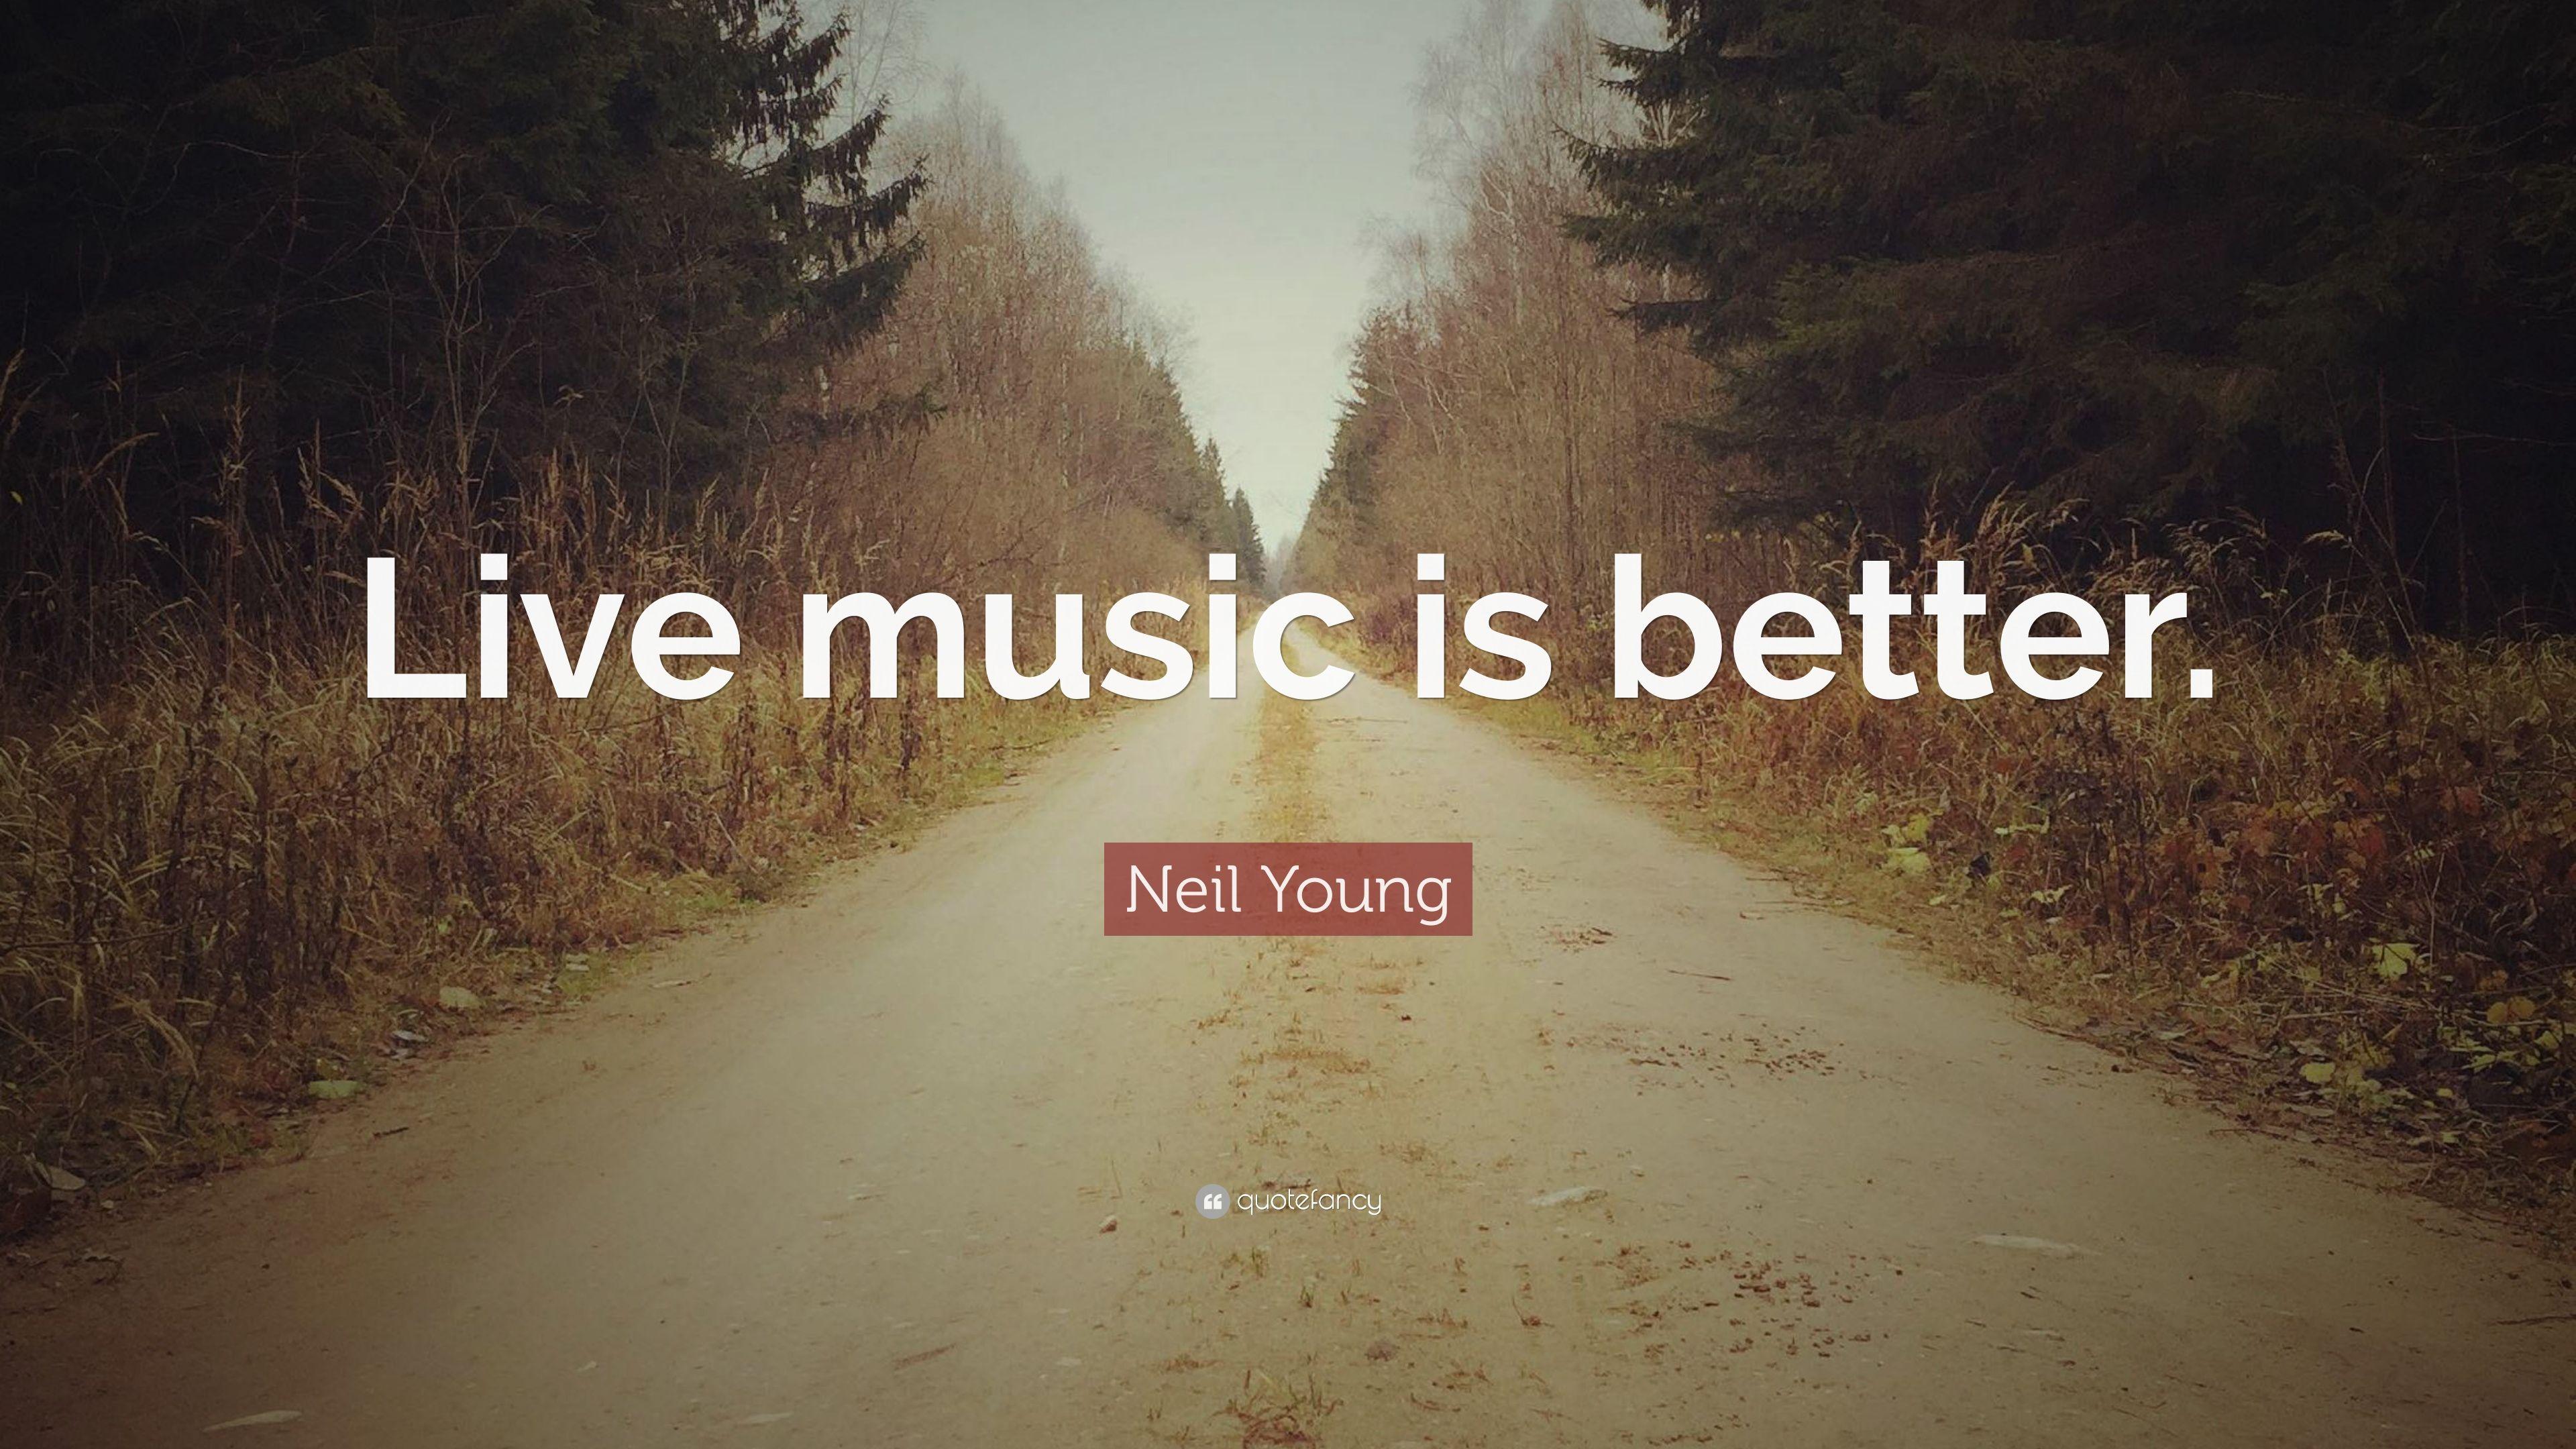 Neil Young Quote: “Live music is better.” (12 wallpaper)